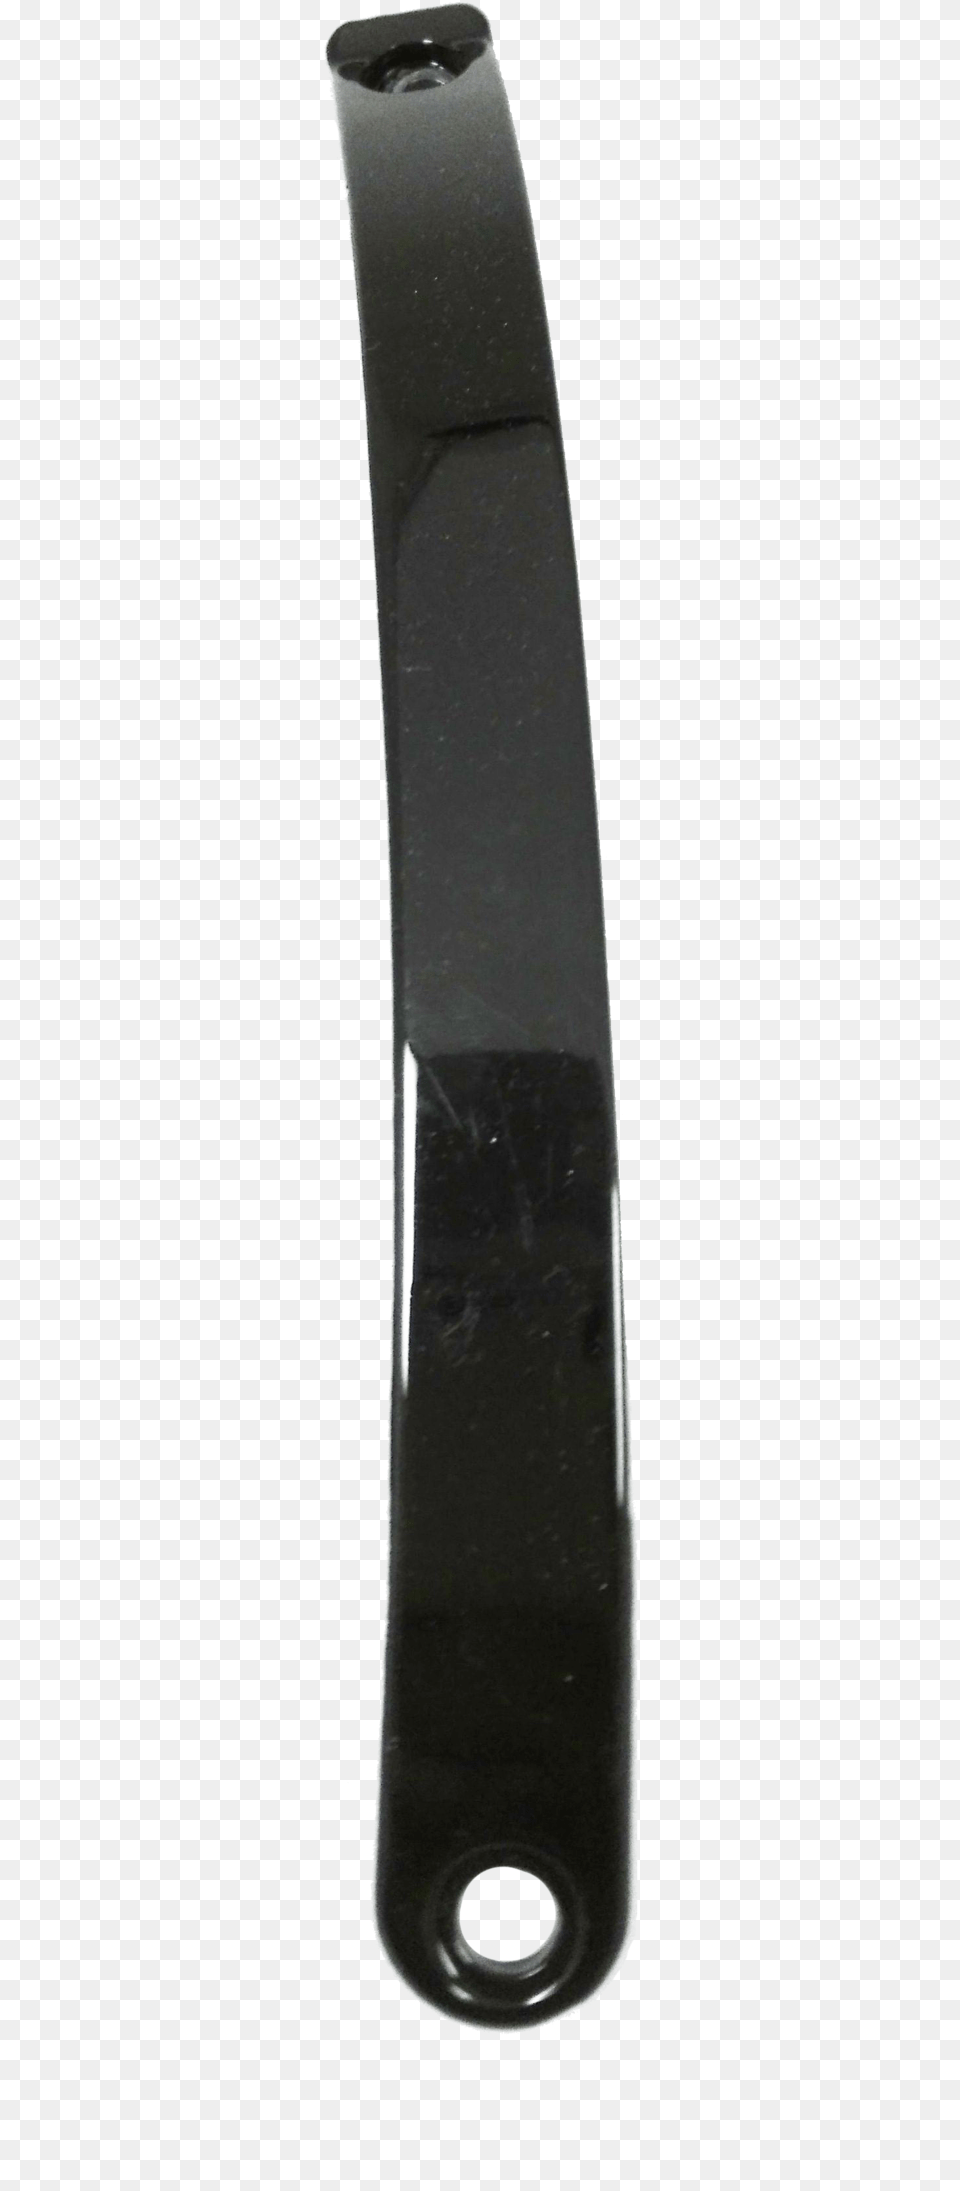 Escobar Black Vct Insertsclass Lazyload Lazyload Blade Png Image